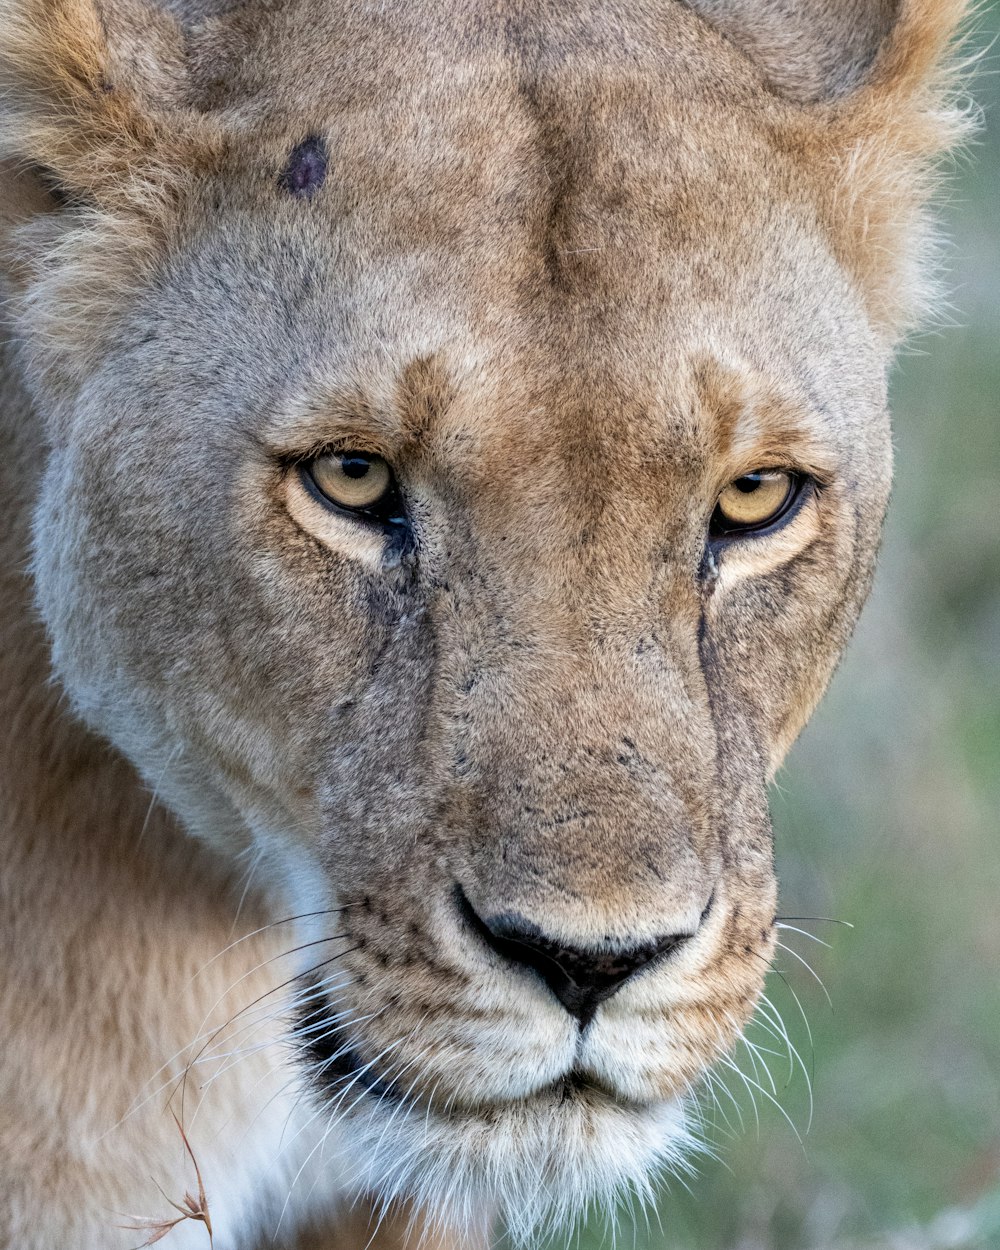 a close up of a lion looking at the camera